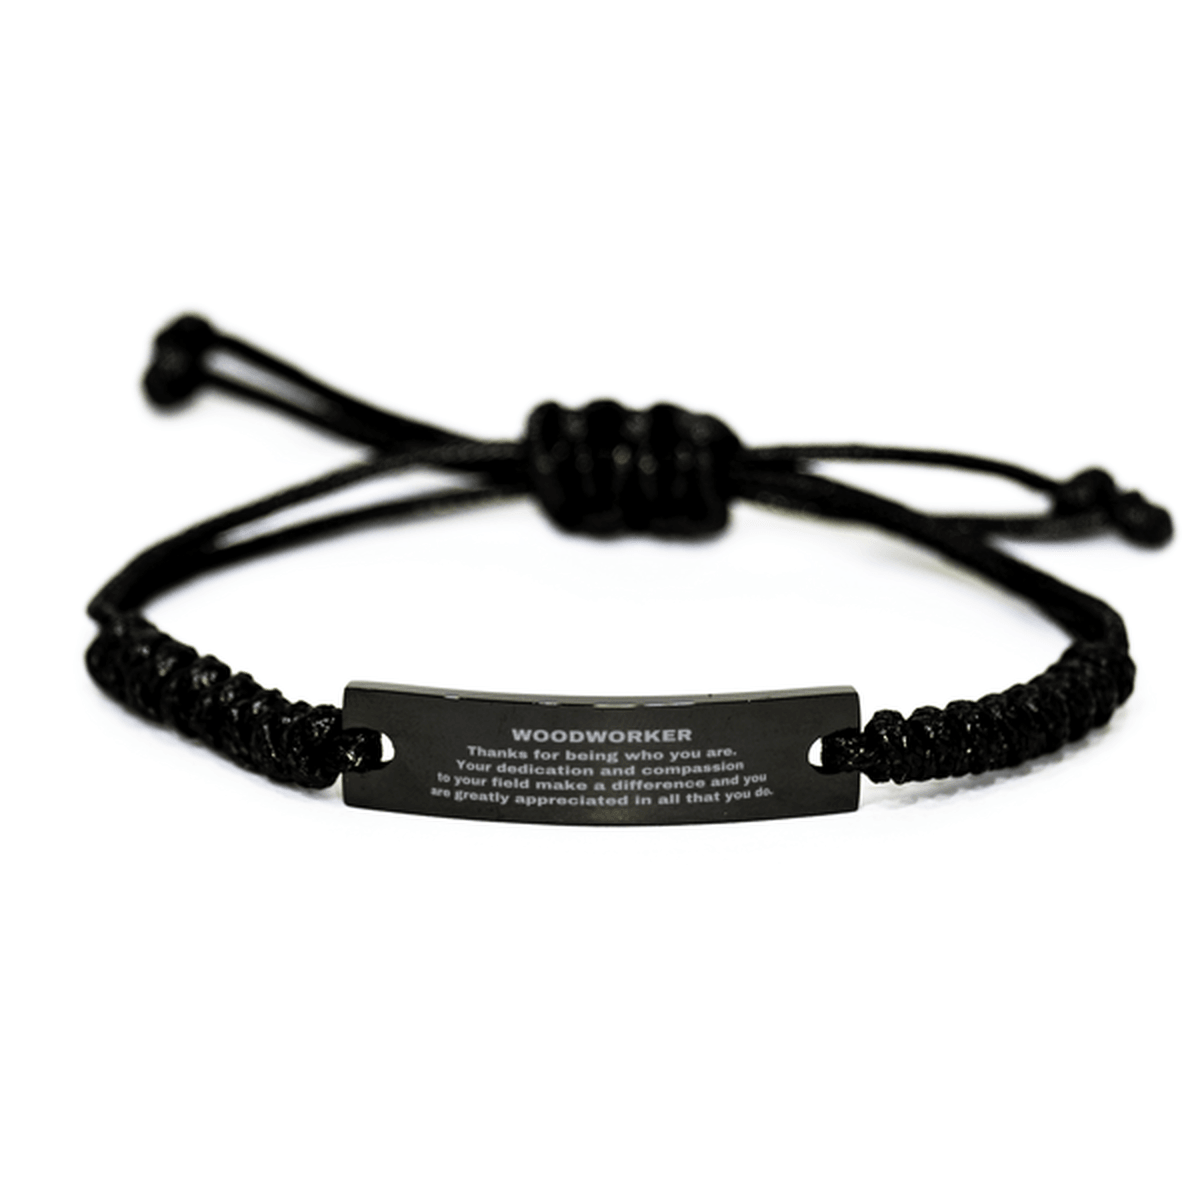 Woodworker Black Braided Leather Rope Engraved Bracelet - Thanks for being who you are - Birthday Christmas Jewelry Gifts Coworkers Colleague Boss - Mallard Moon Gift Shop